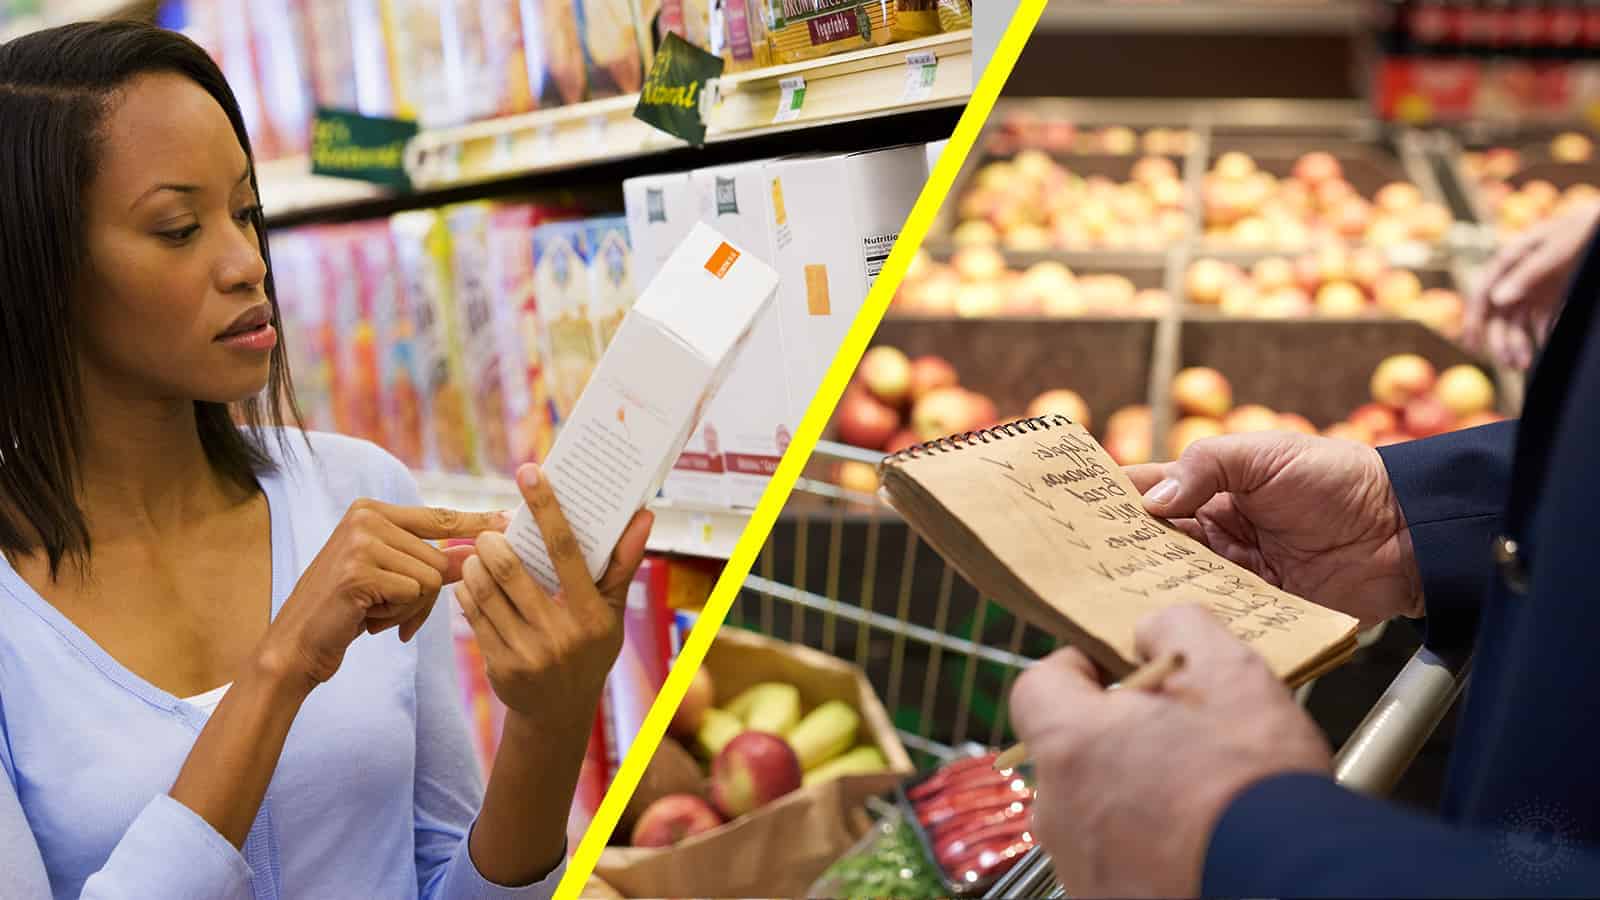 15 Grocery Shopping Habits That Promote Weight Loss